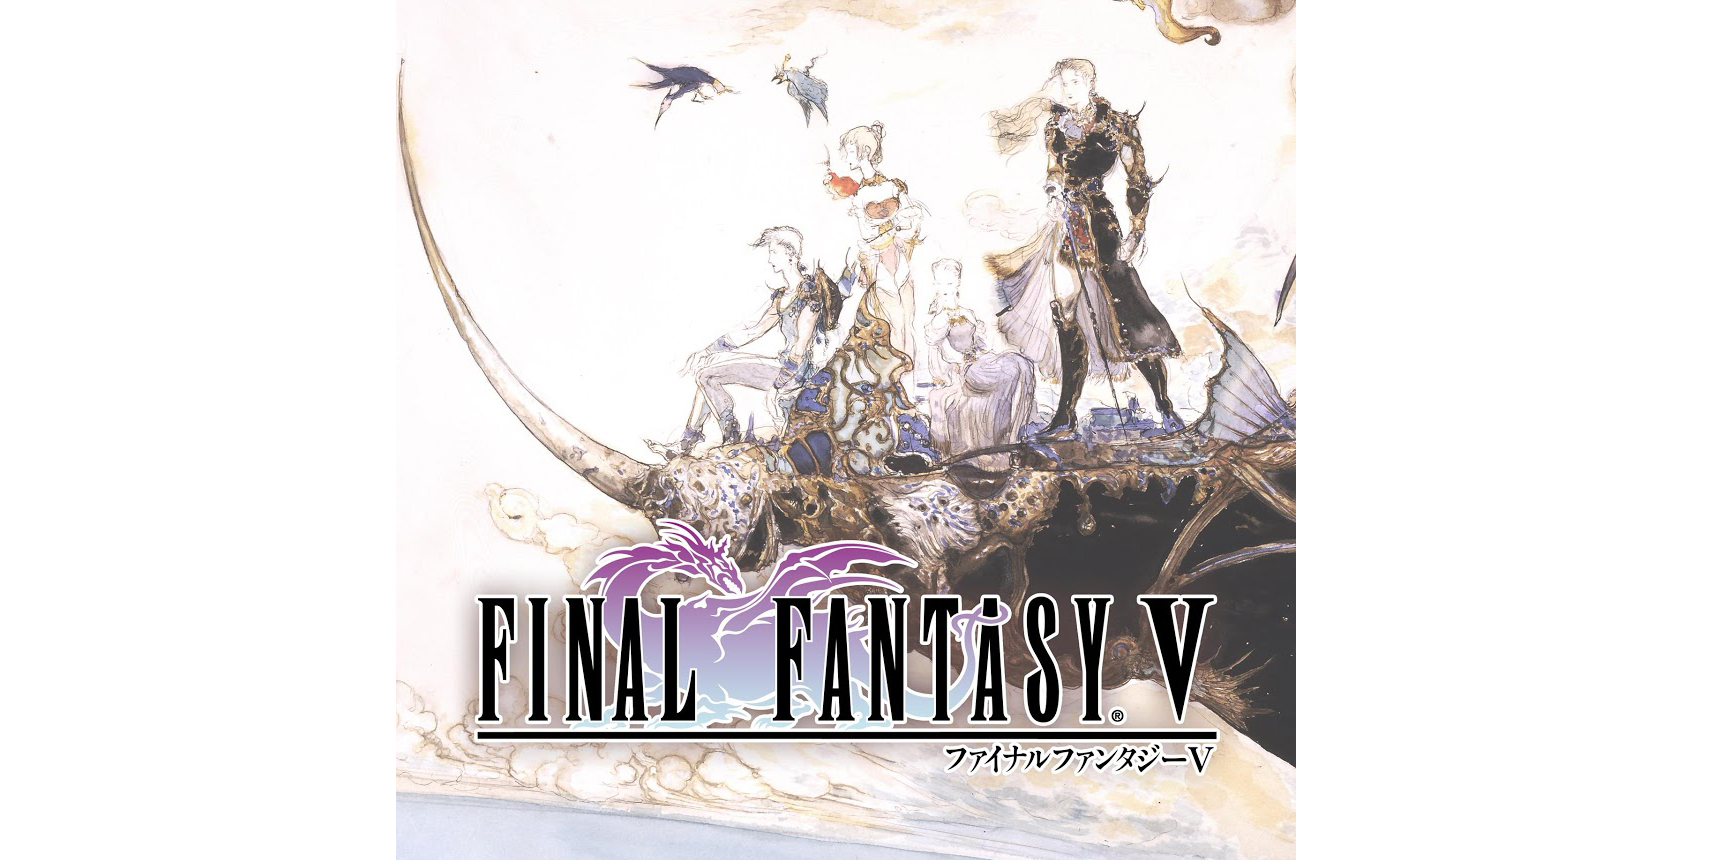 Final Fantasy V is Coming to PC